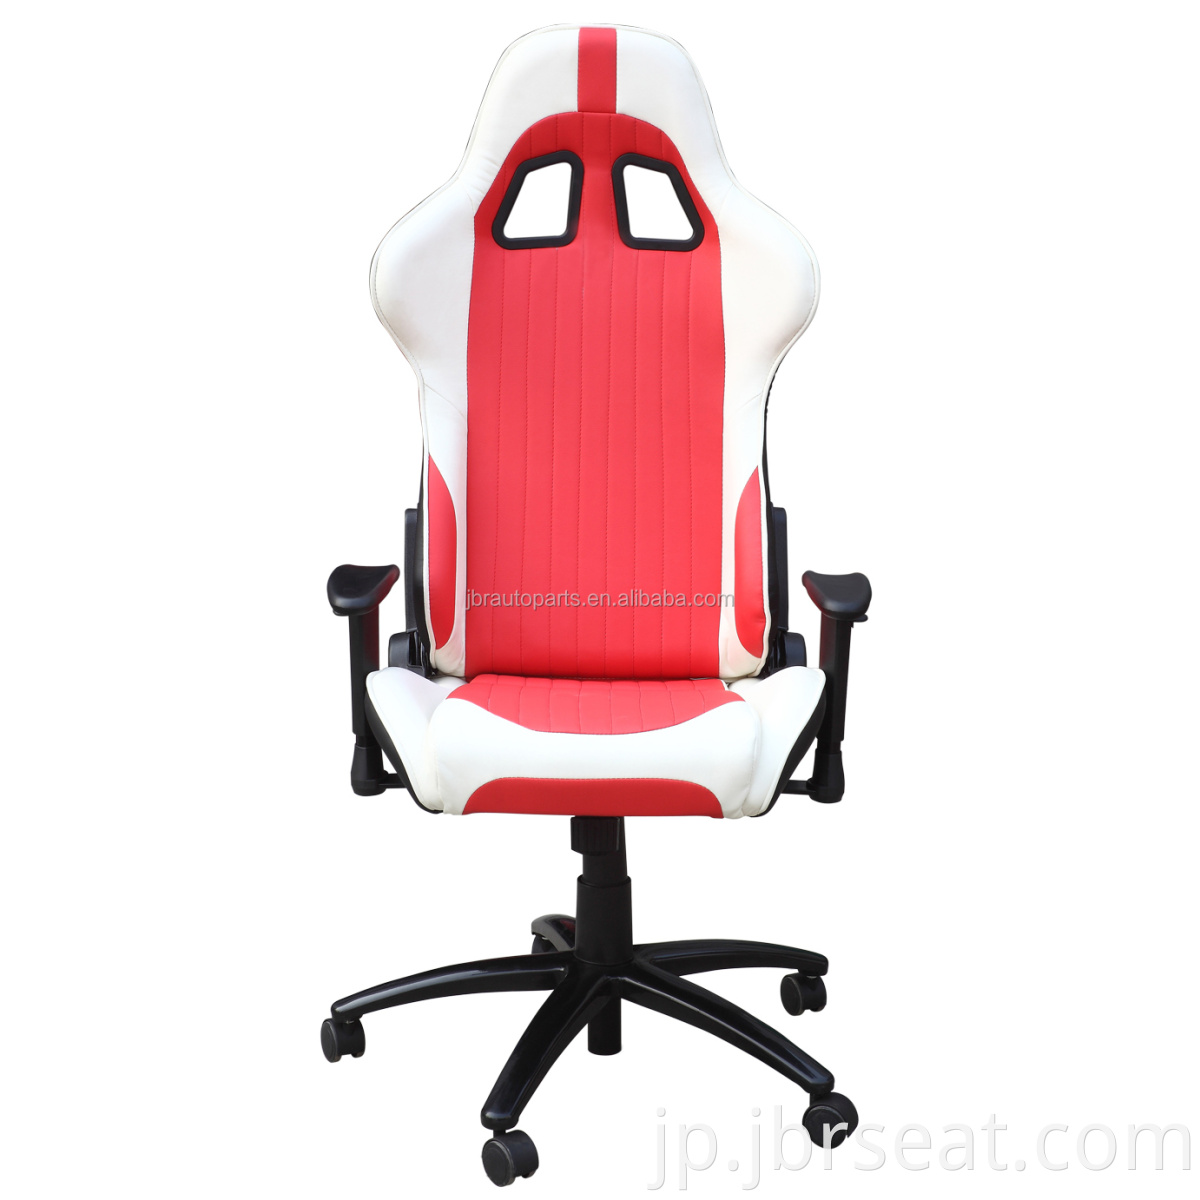 Adjustable Racing Seat Office Chair